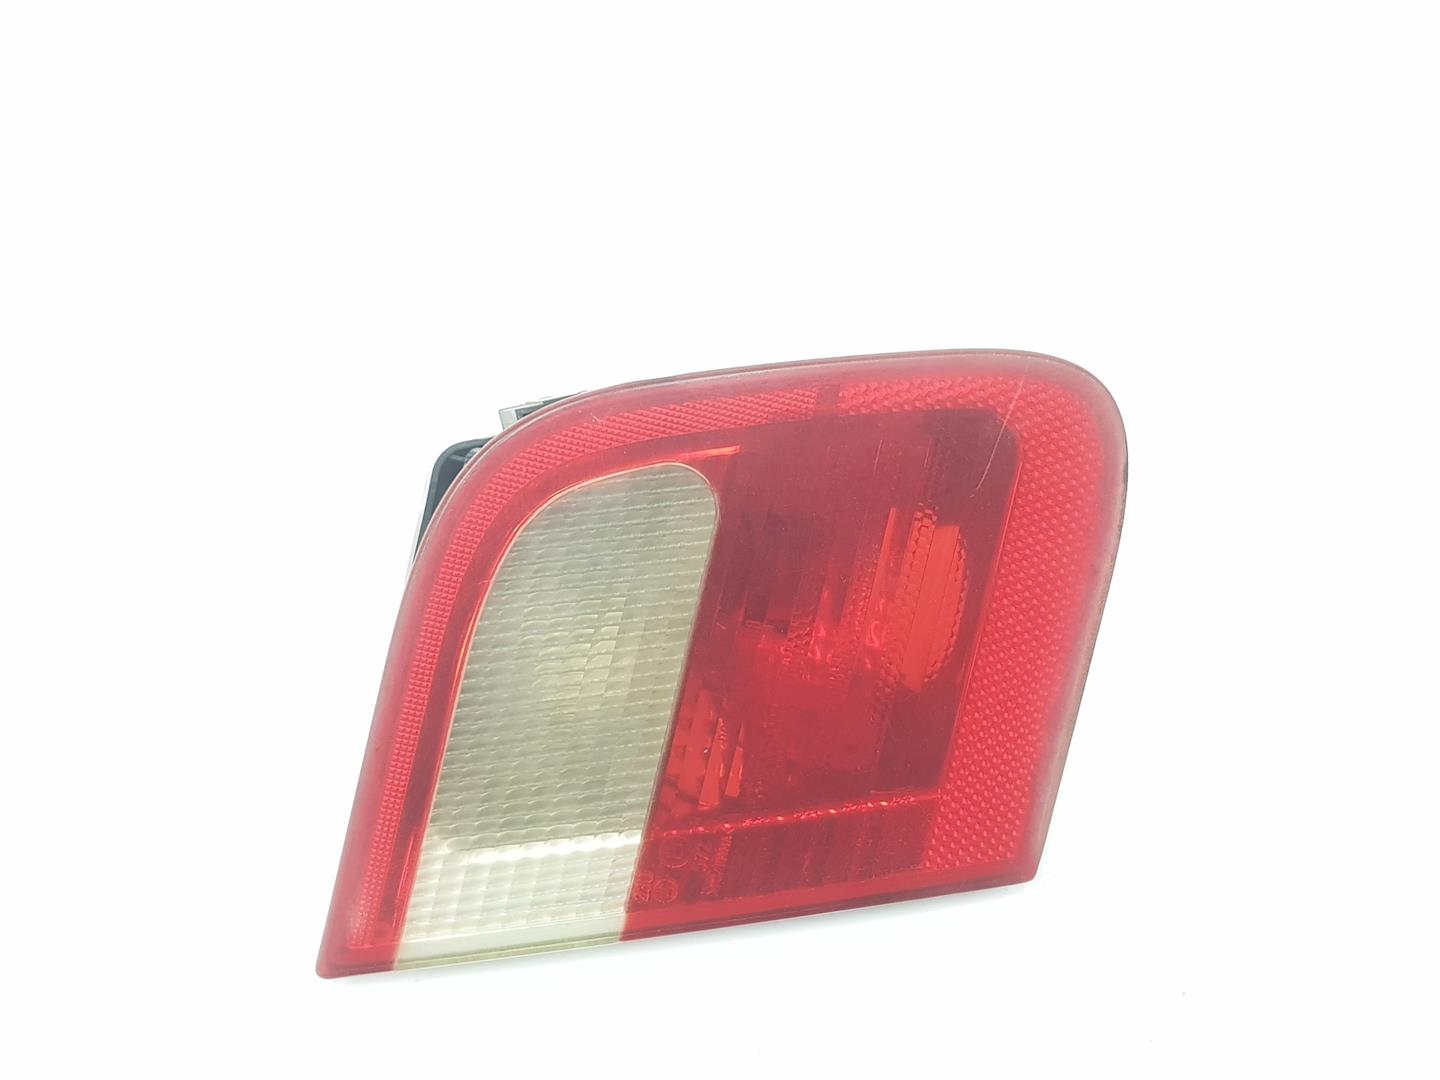 BMW 3 Series E46 (1997-2006) Rear Left Taillight 8364923, 63218364923 23754717